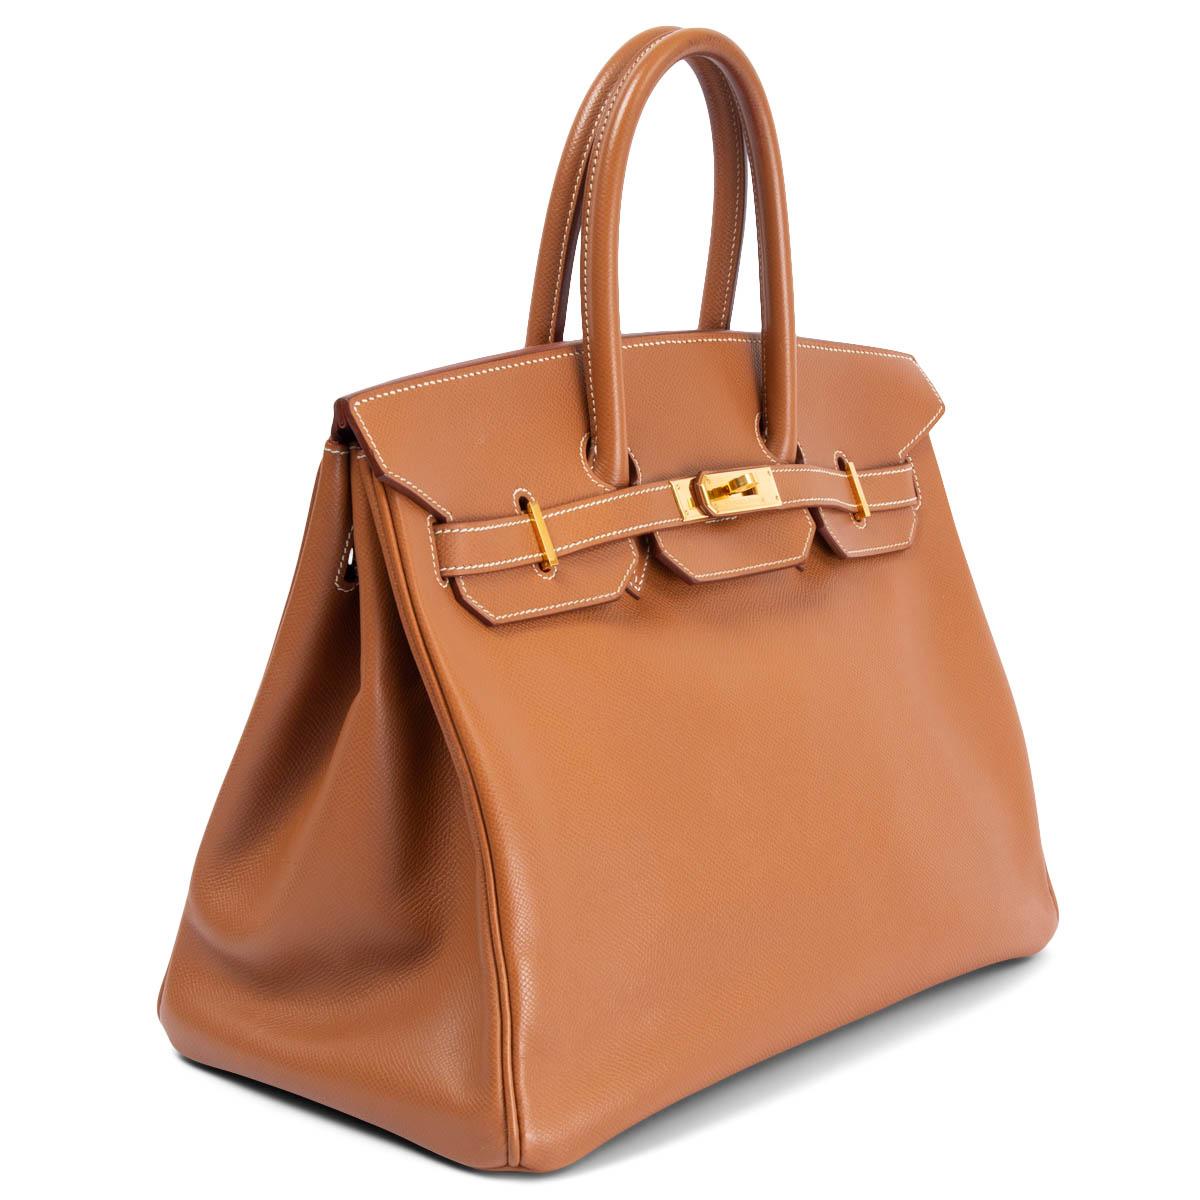 100% authentic Hermès Birkin 35 bag in Gold (camel brown) Veau Epsom leather. Lined in Chevre (goat skin) with an open pocket against the front and a zipper pocket against the back. Has been carried with soft wear to the corners, a tiny dark spot on